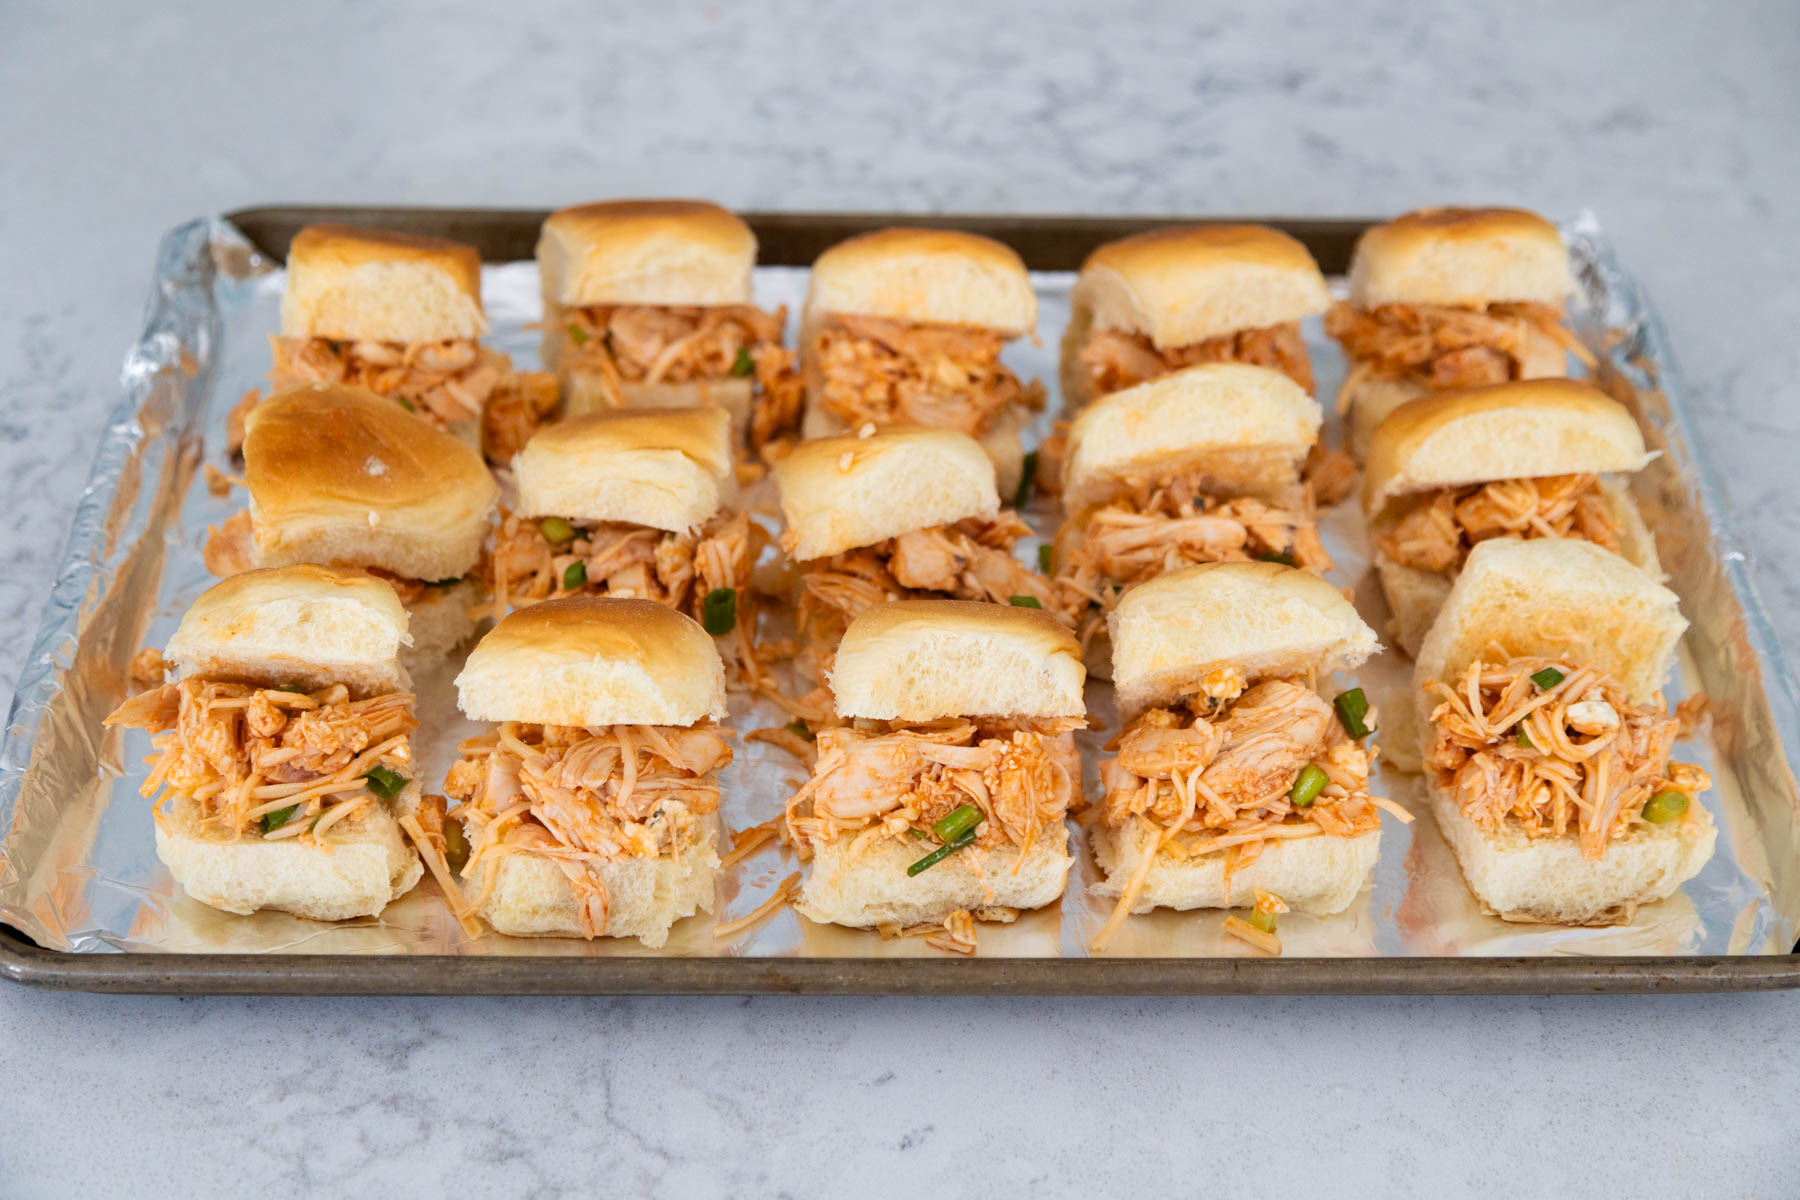 The assembled chicken sliders are on a large baking pan lined with aluminum foil.